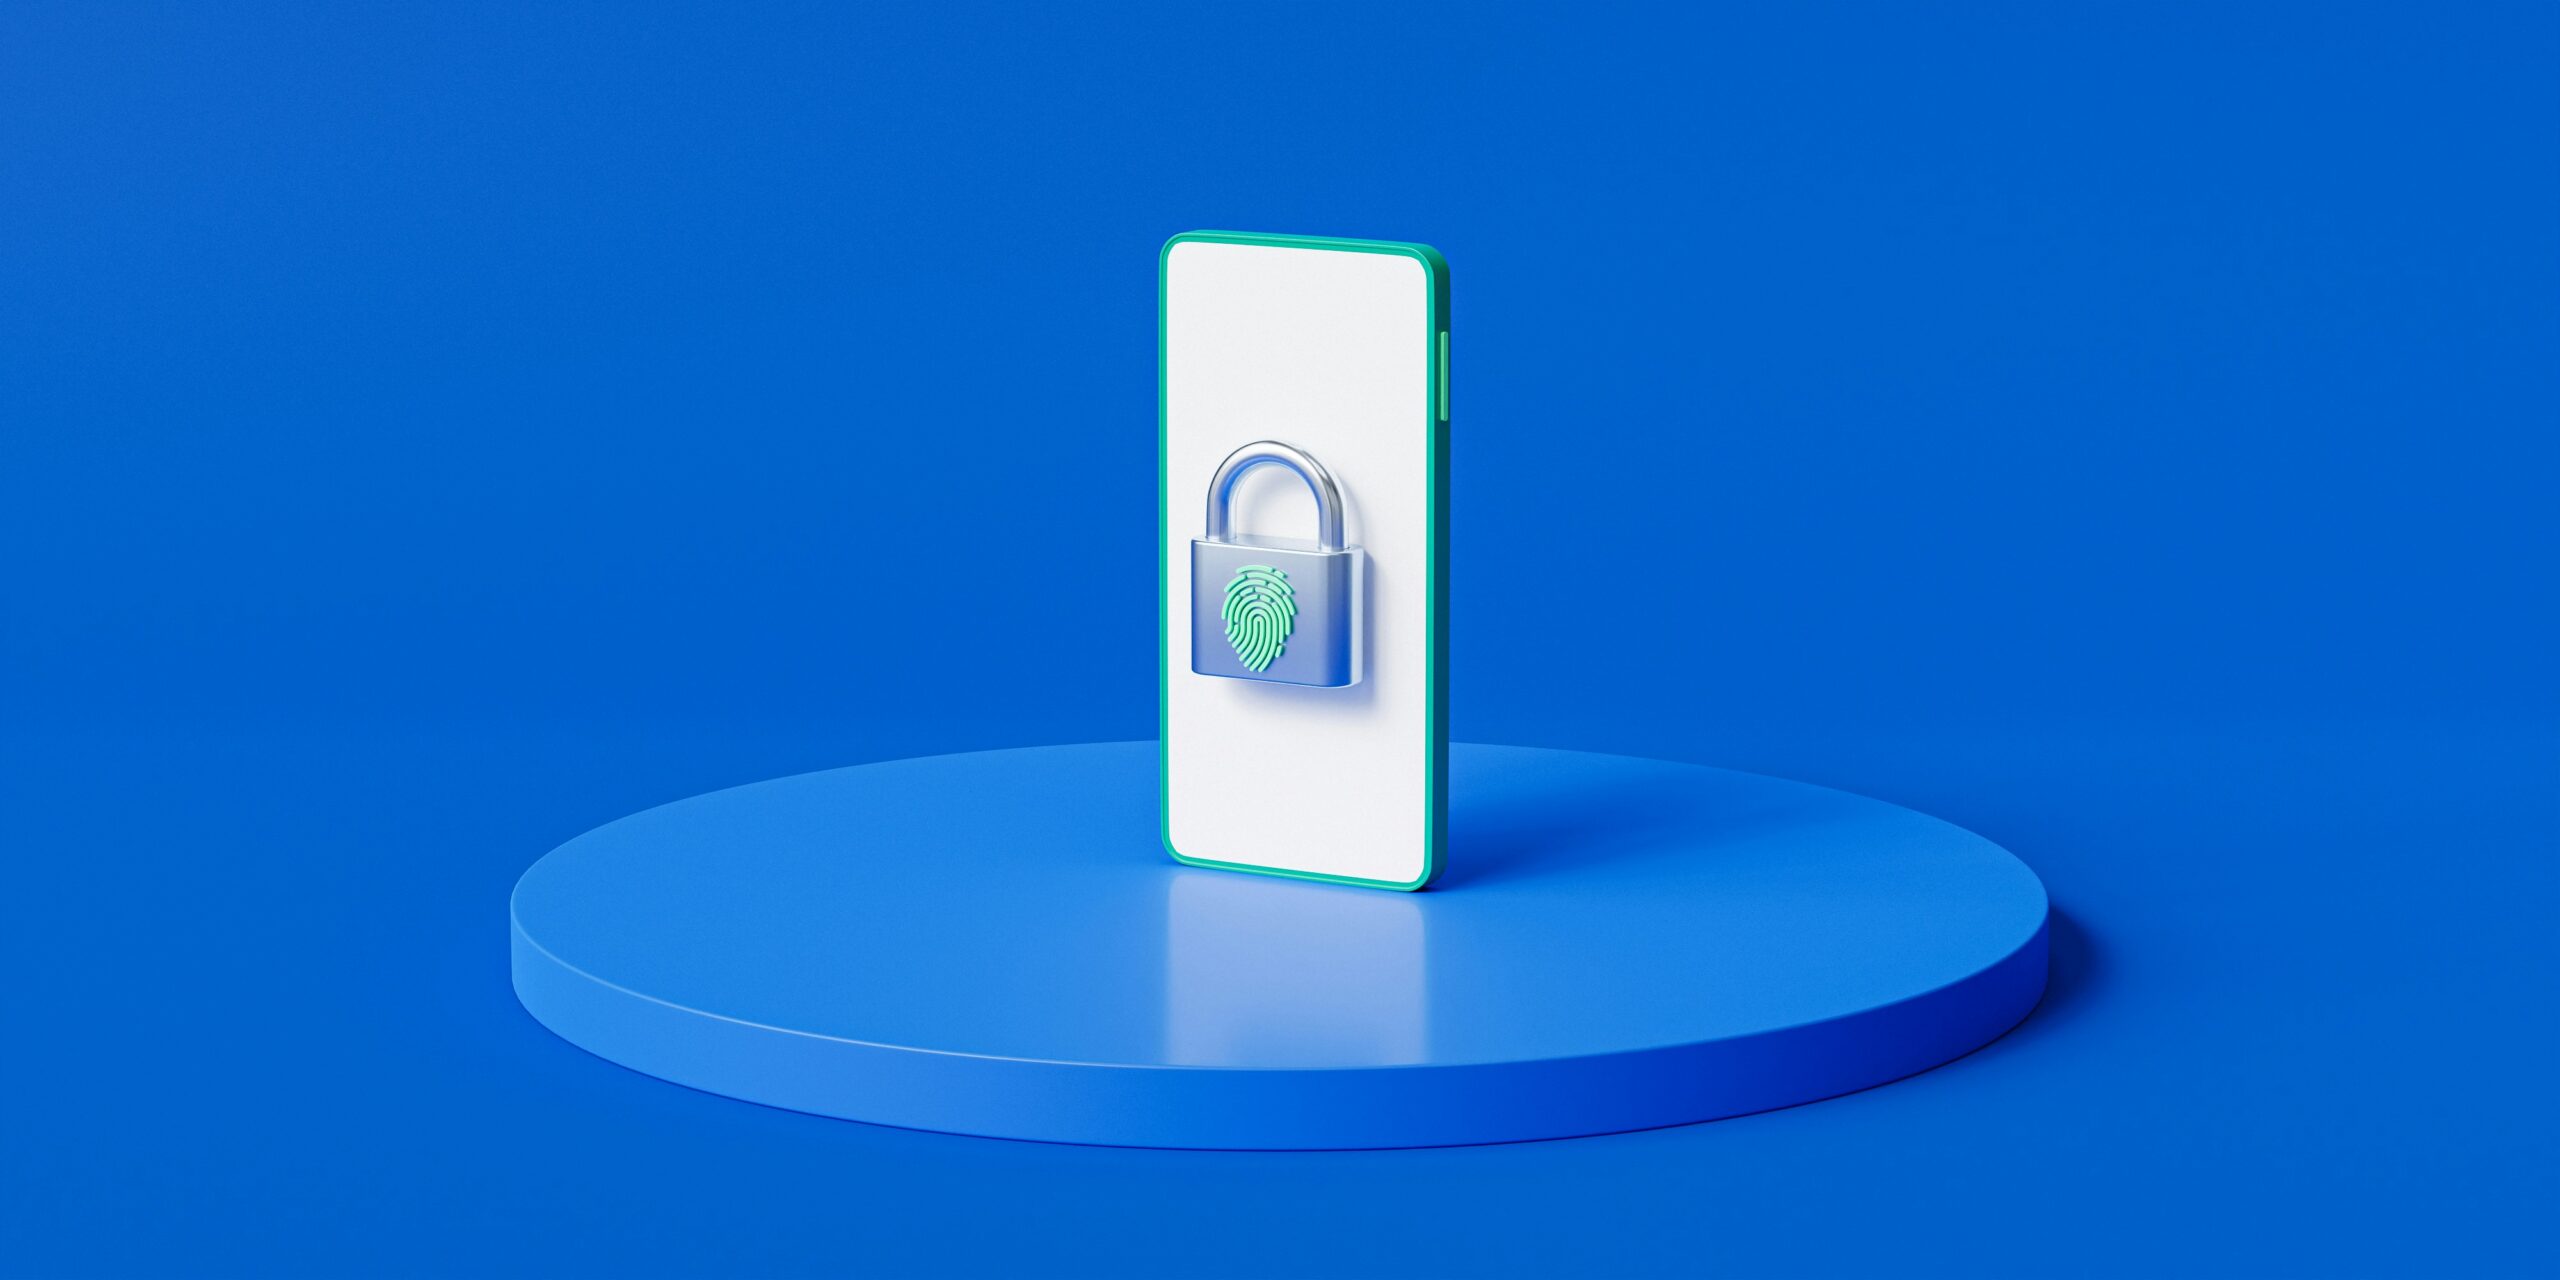 A phone with a padlock on it, symbolizing cybersecurity business ideas.